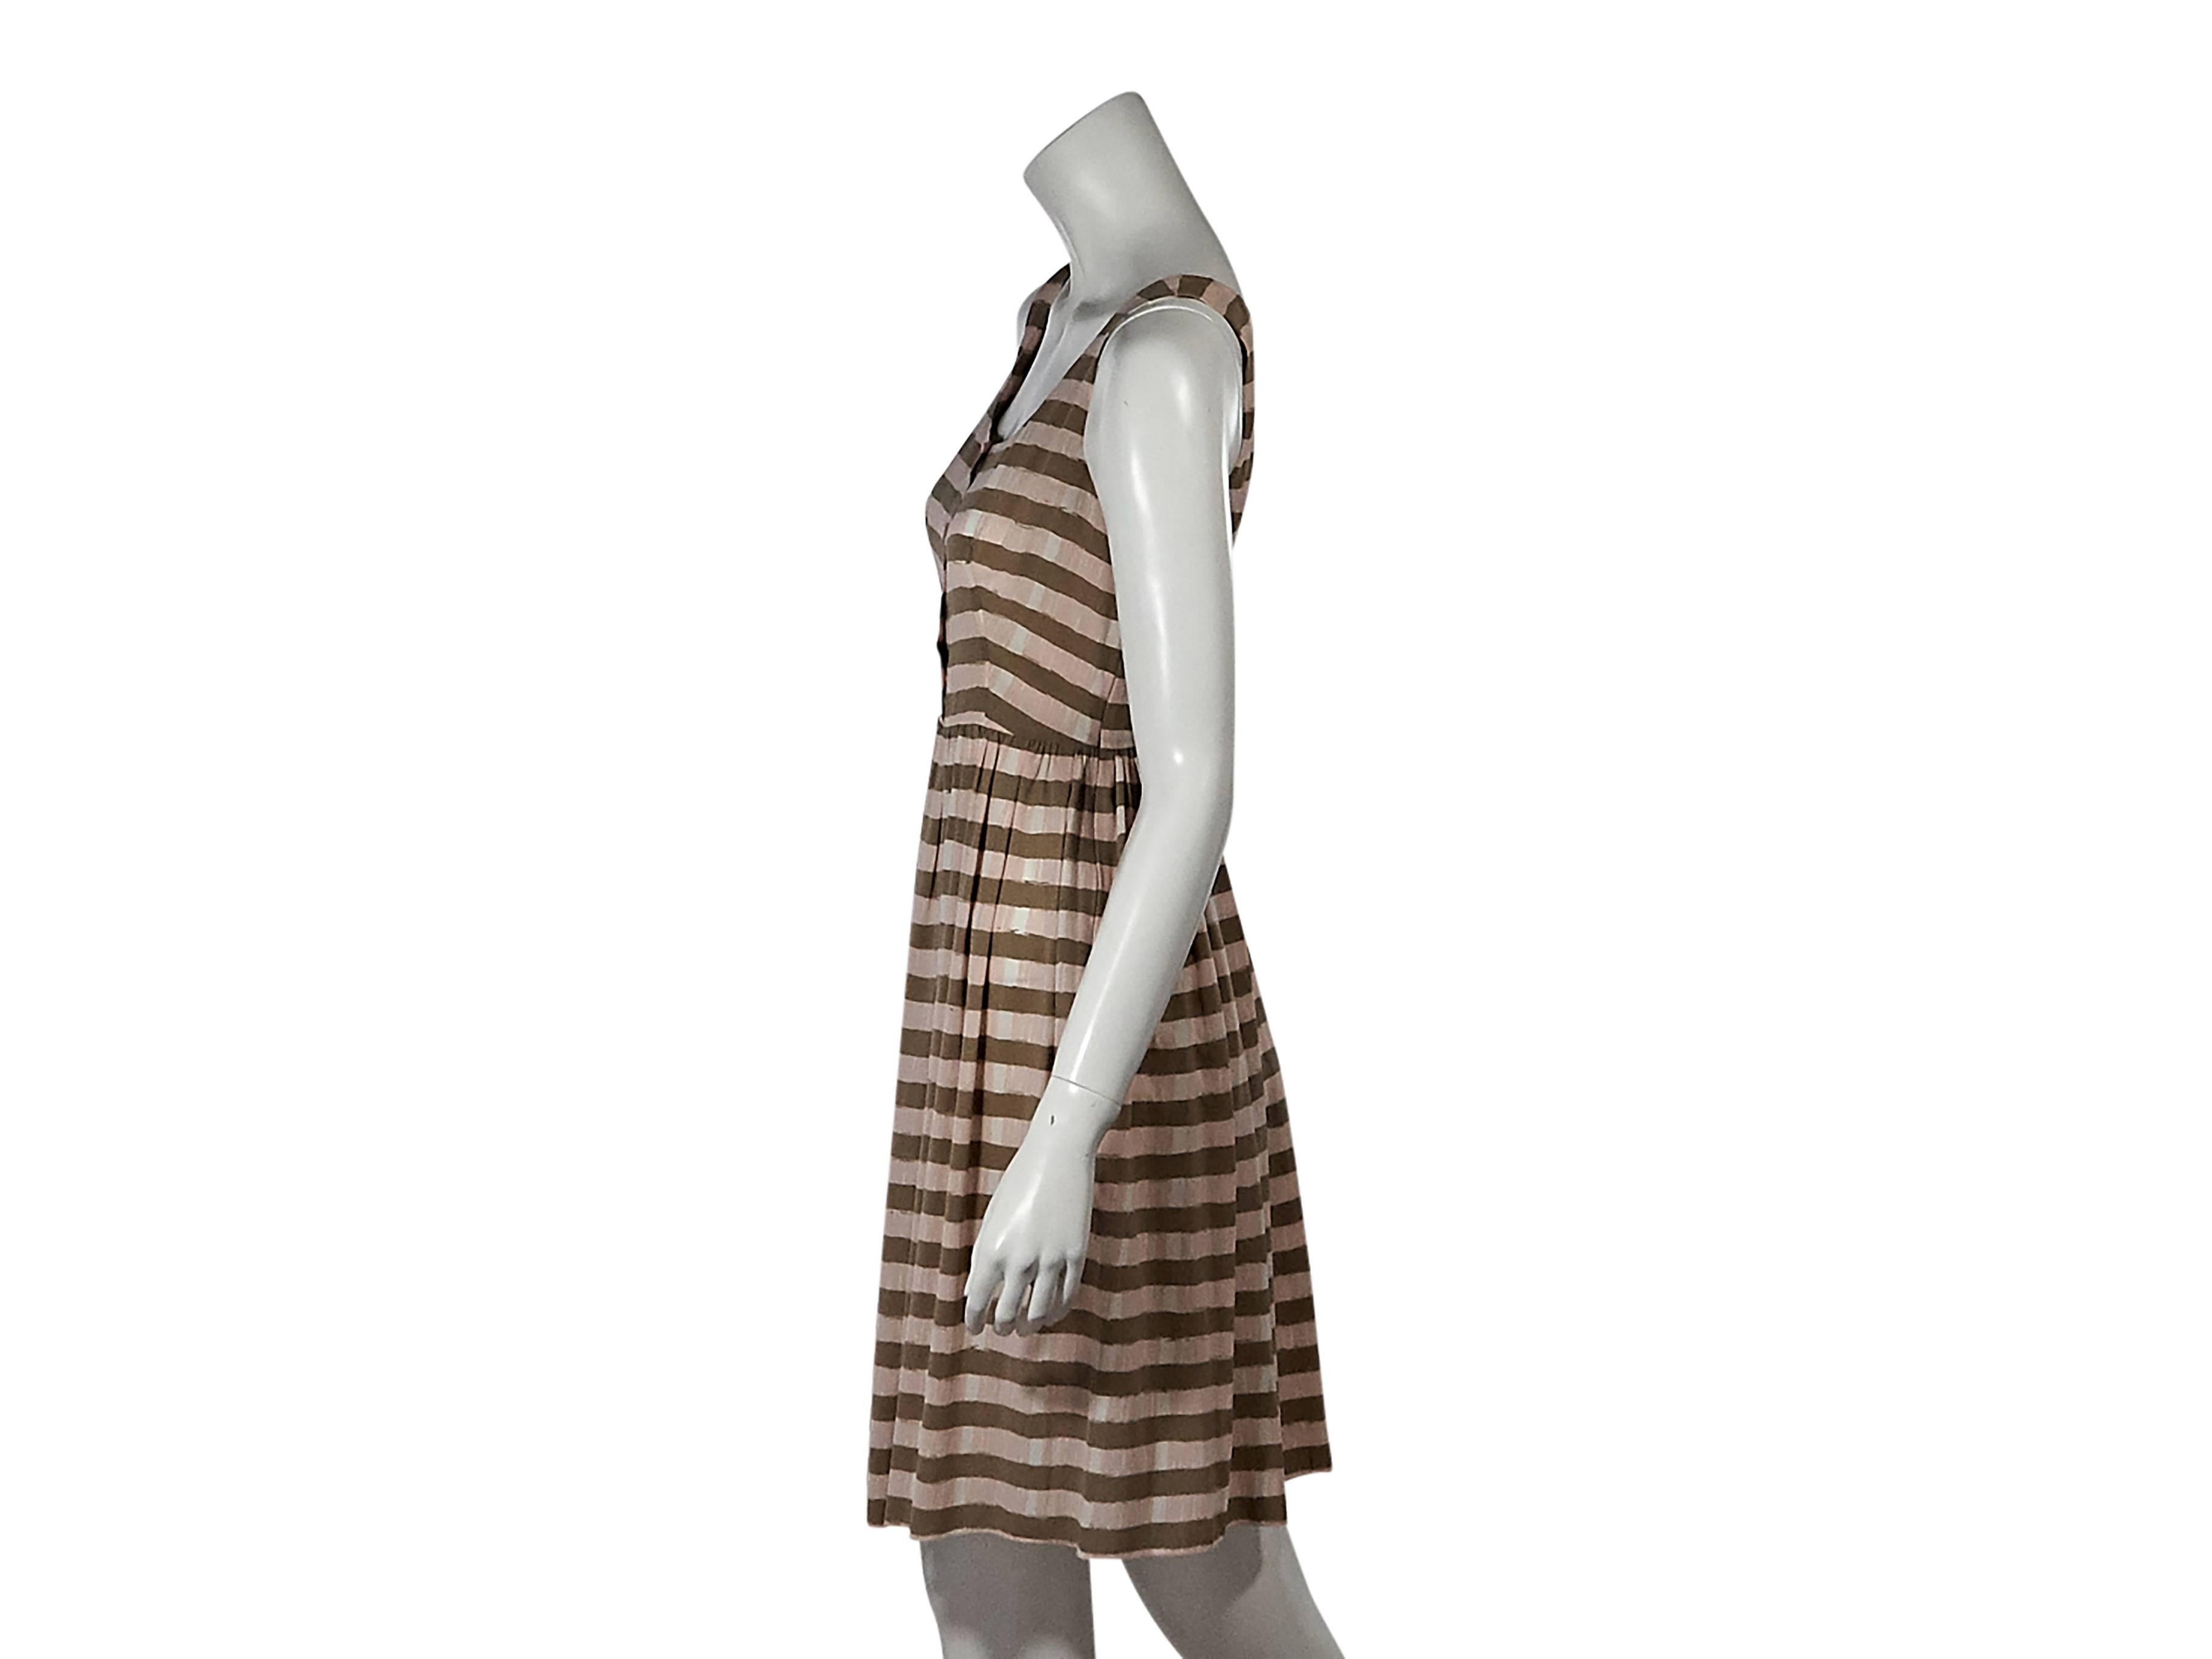 Product details:  Pink and brown striped dress by Prada.  Scoopneck.  Sleeveless.  Button-front placket.  Concealed side zip closure. Size 2    
Condition: Pre-owned. Very good.

Est. Retail $ 798.00
